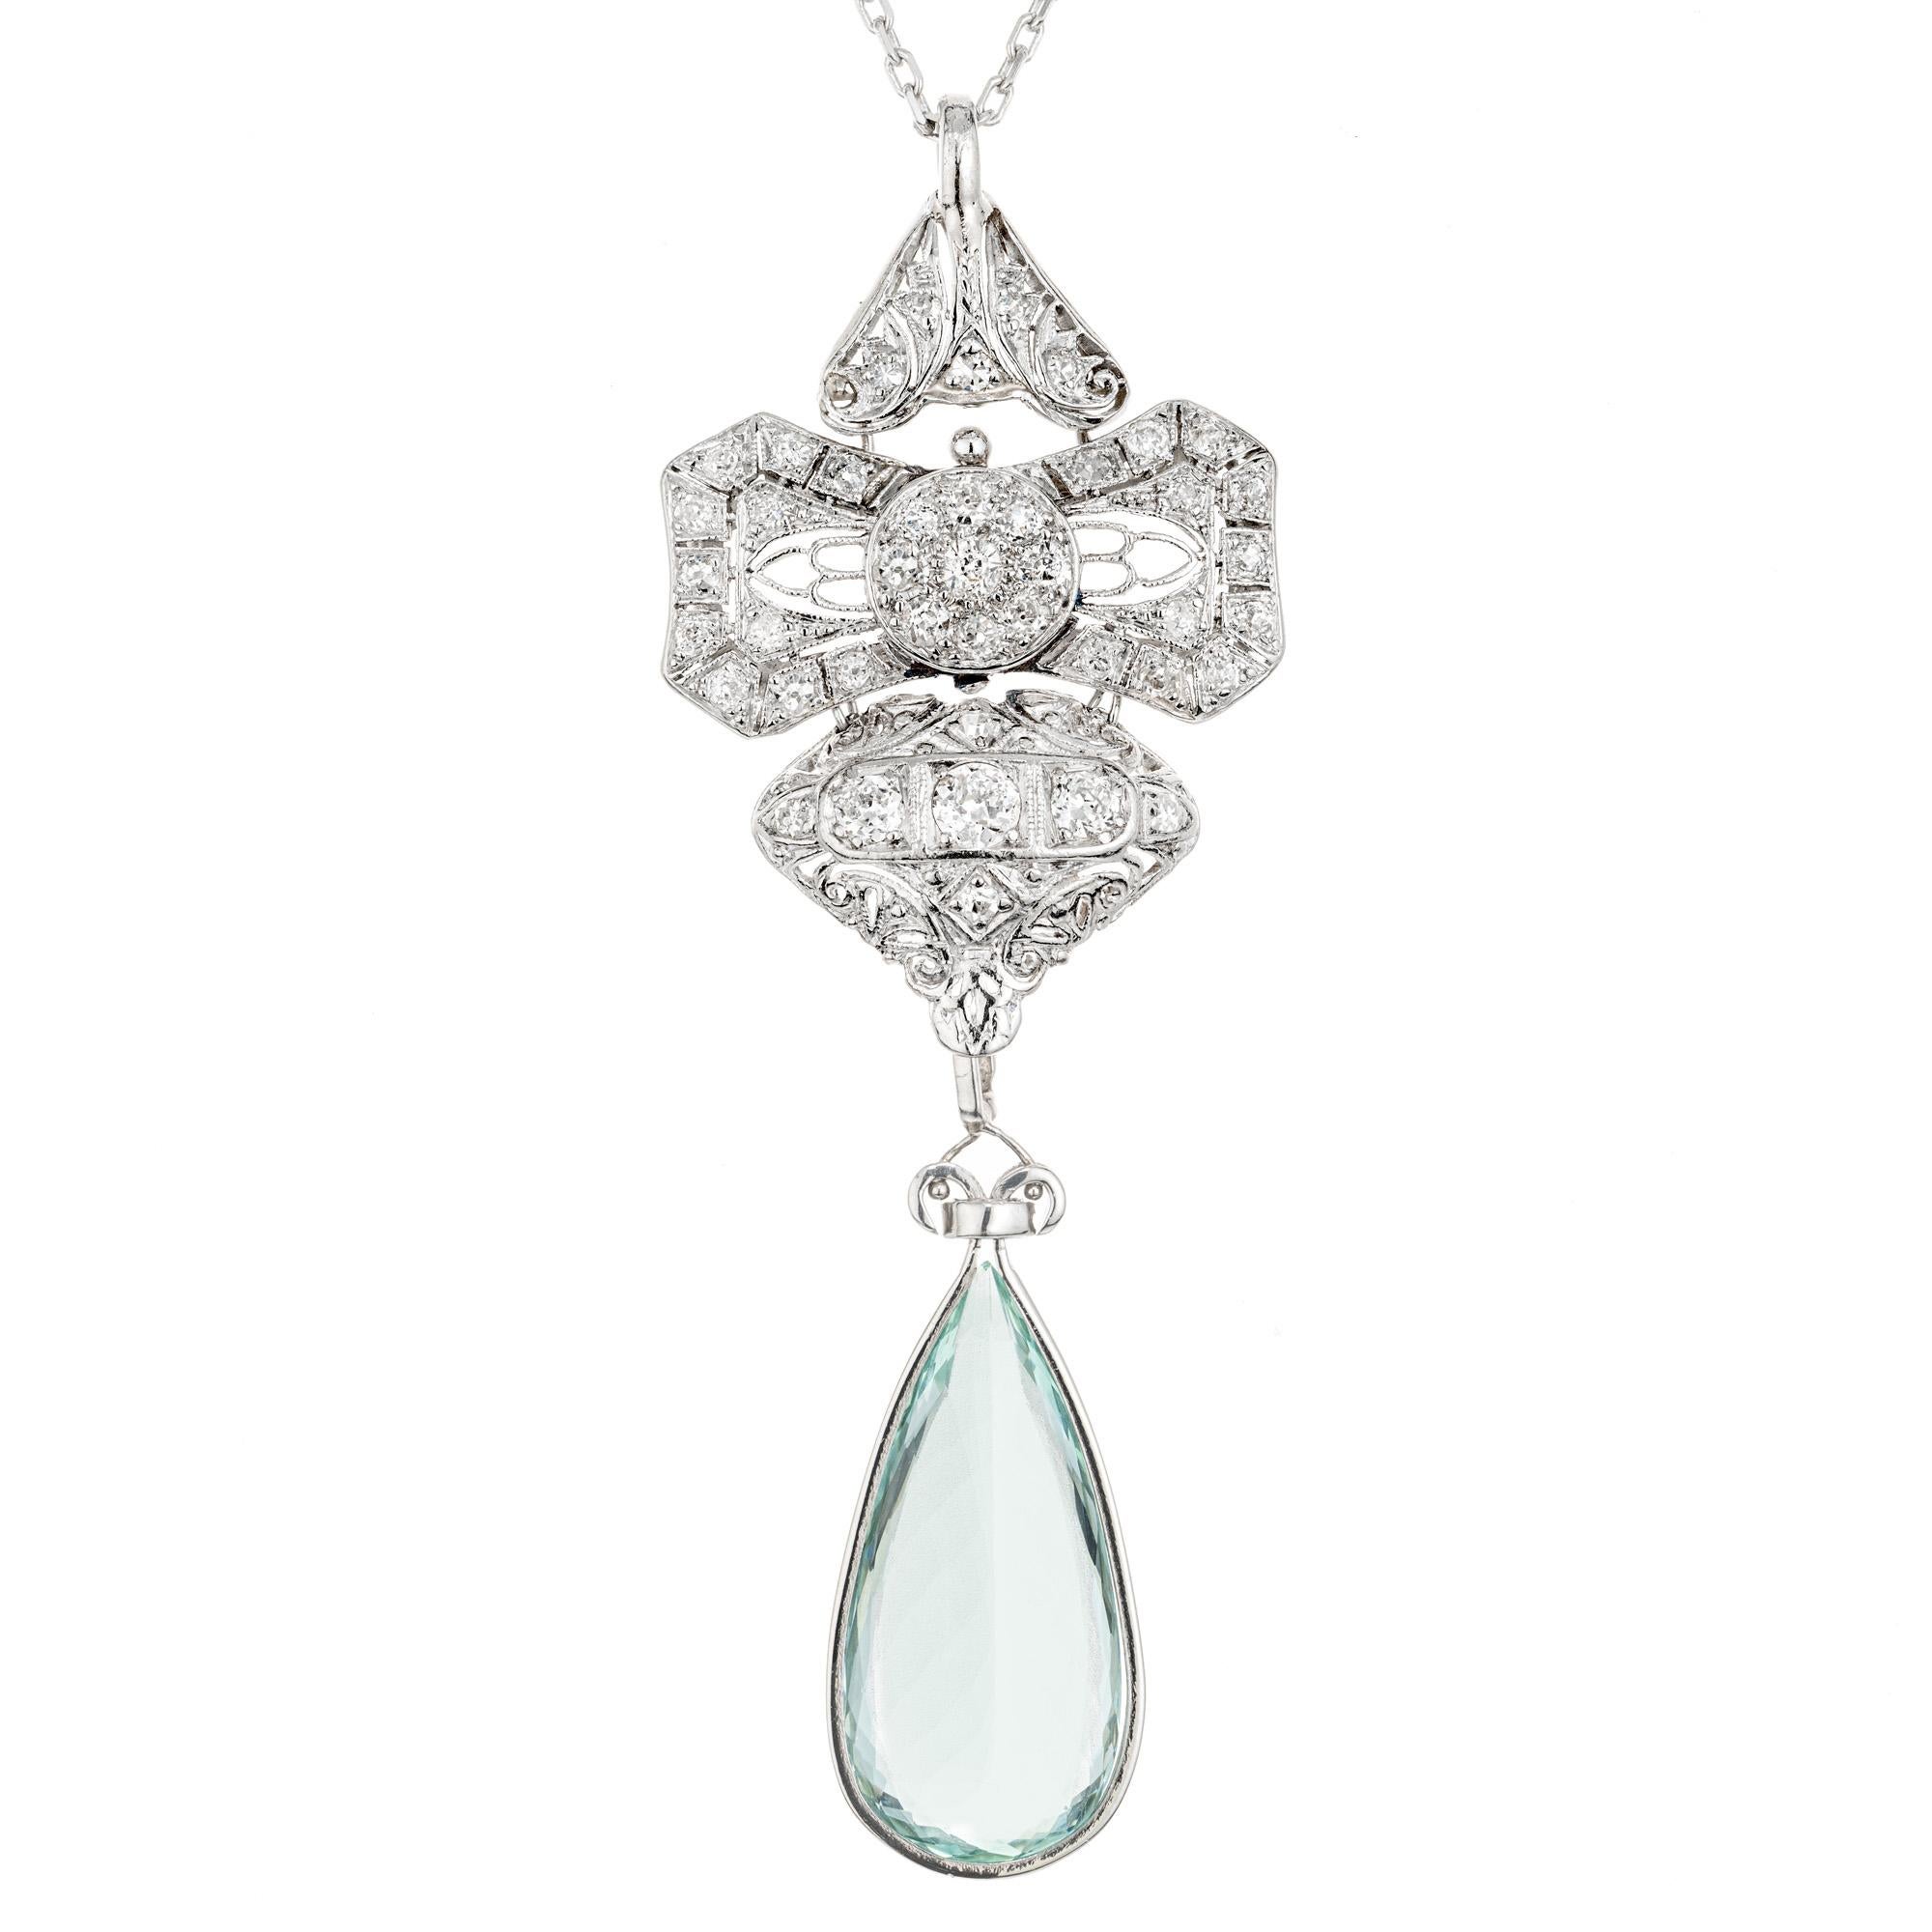 Stunning 1930's Aquamarine and diamond pendant necklace. This spectacular Art Deco filigree pendant begins with a pear shaped 9.75cts bezel set aqua which dangles at the bottom of a platinum pendant that consists of platinum handmade pendant with 43